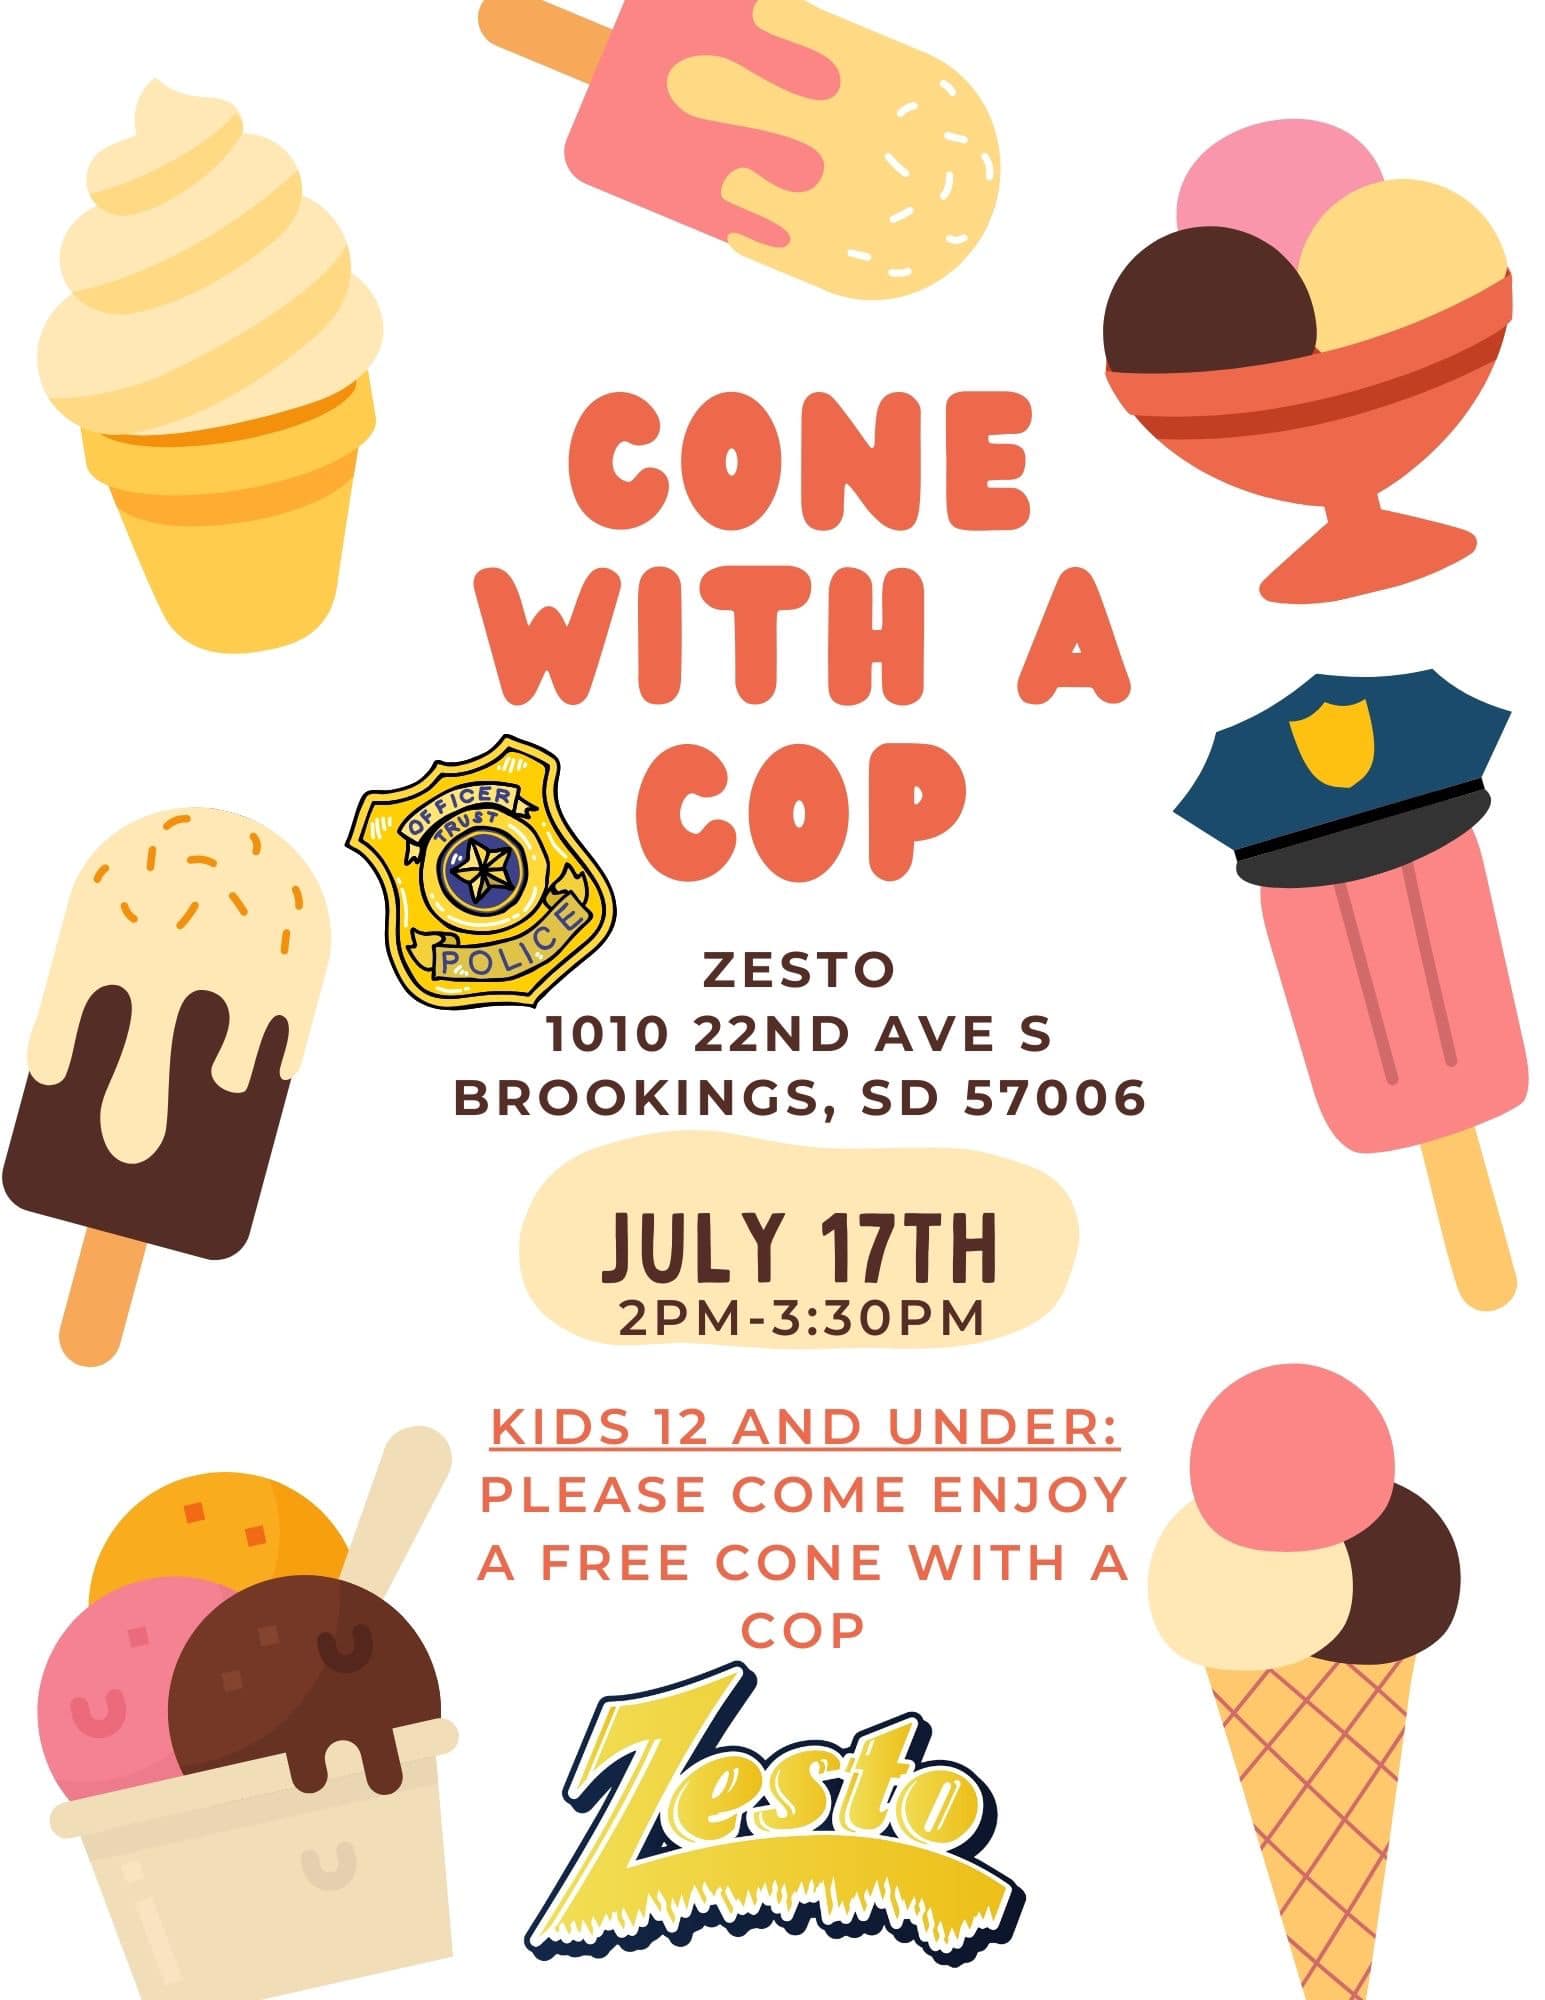 Text in the middle reads: "Cone with a Cop; Zesto 1010 22nd Ave S Brookings, SD 57006; July 17th 2pm - 3:30pm; Kids 12 and under please come enjoy a free cone with a cop". The text is surrounded by bright and colorful images of different ice cream cones and dishes.